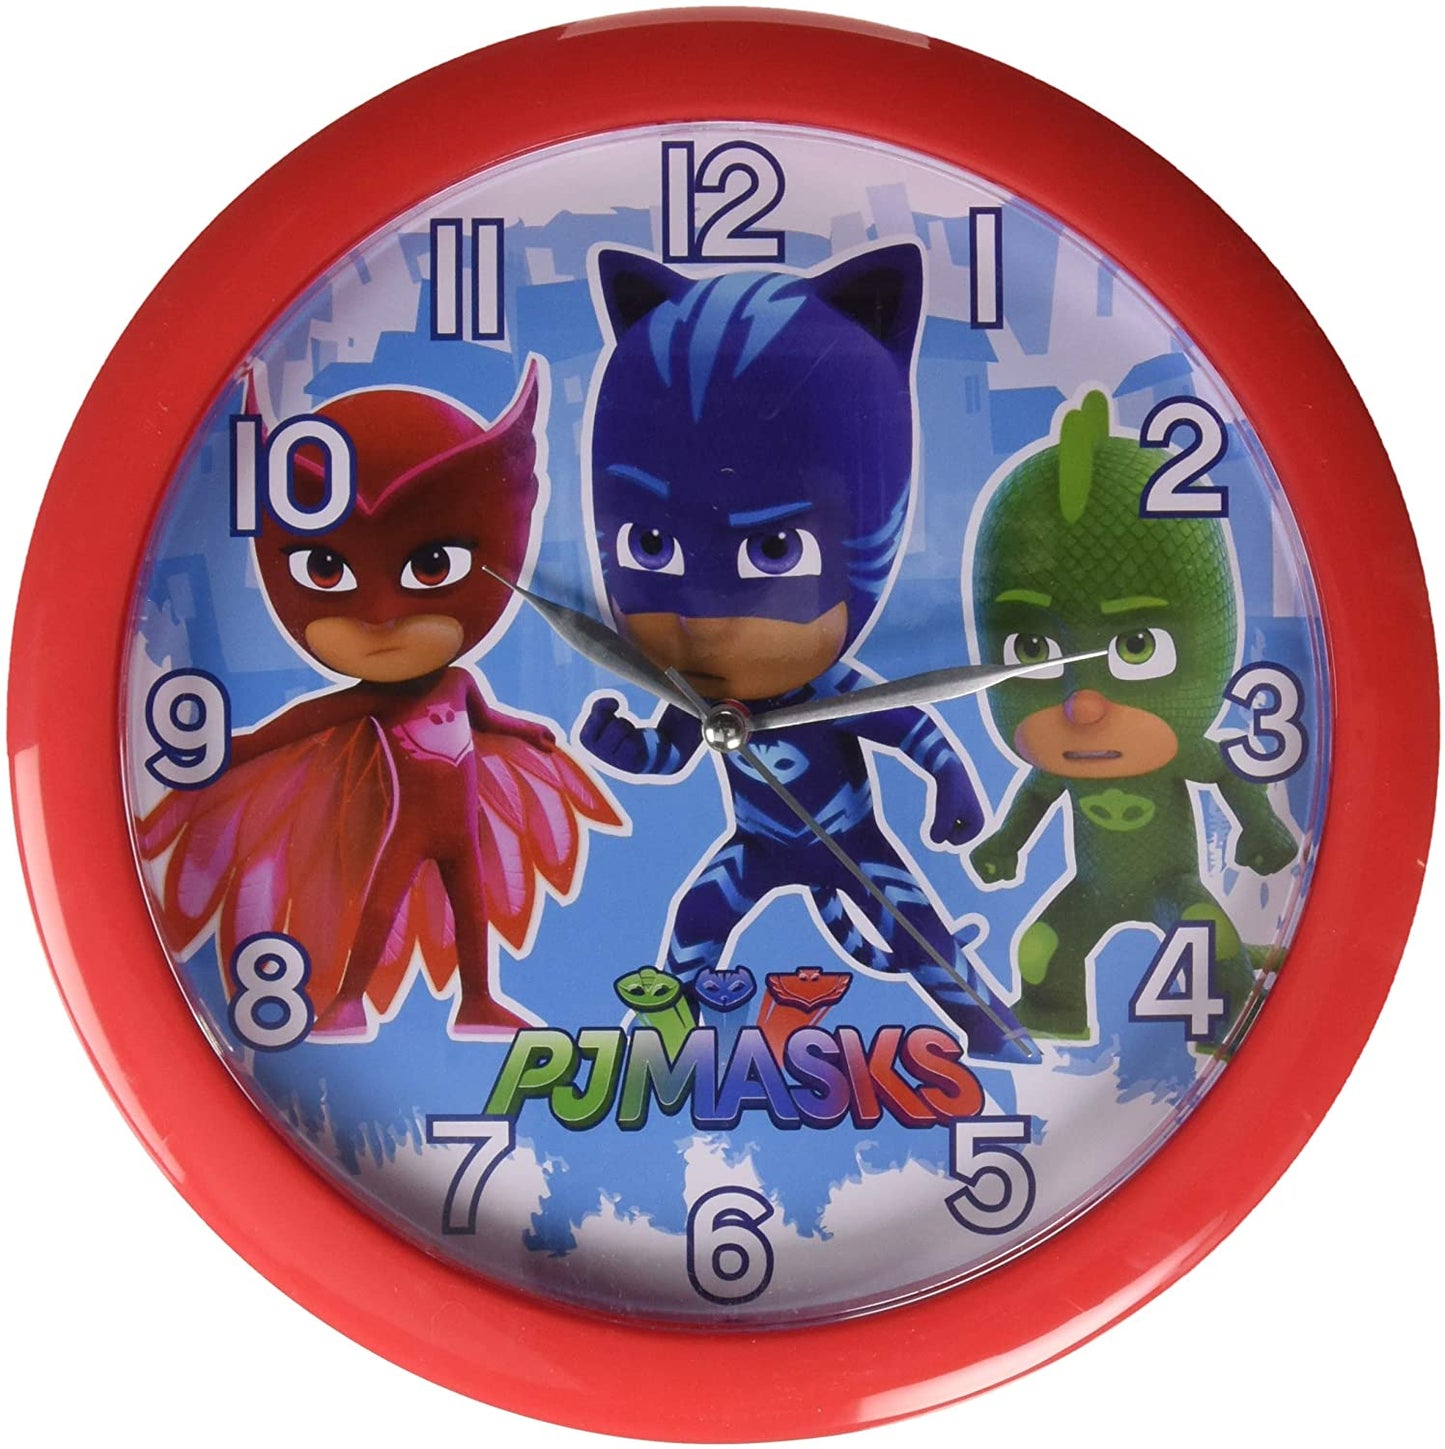 PJ Masks 10 inches Round Wall Clock With Face Print Image: Owlette, Catboy, & Gekko